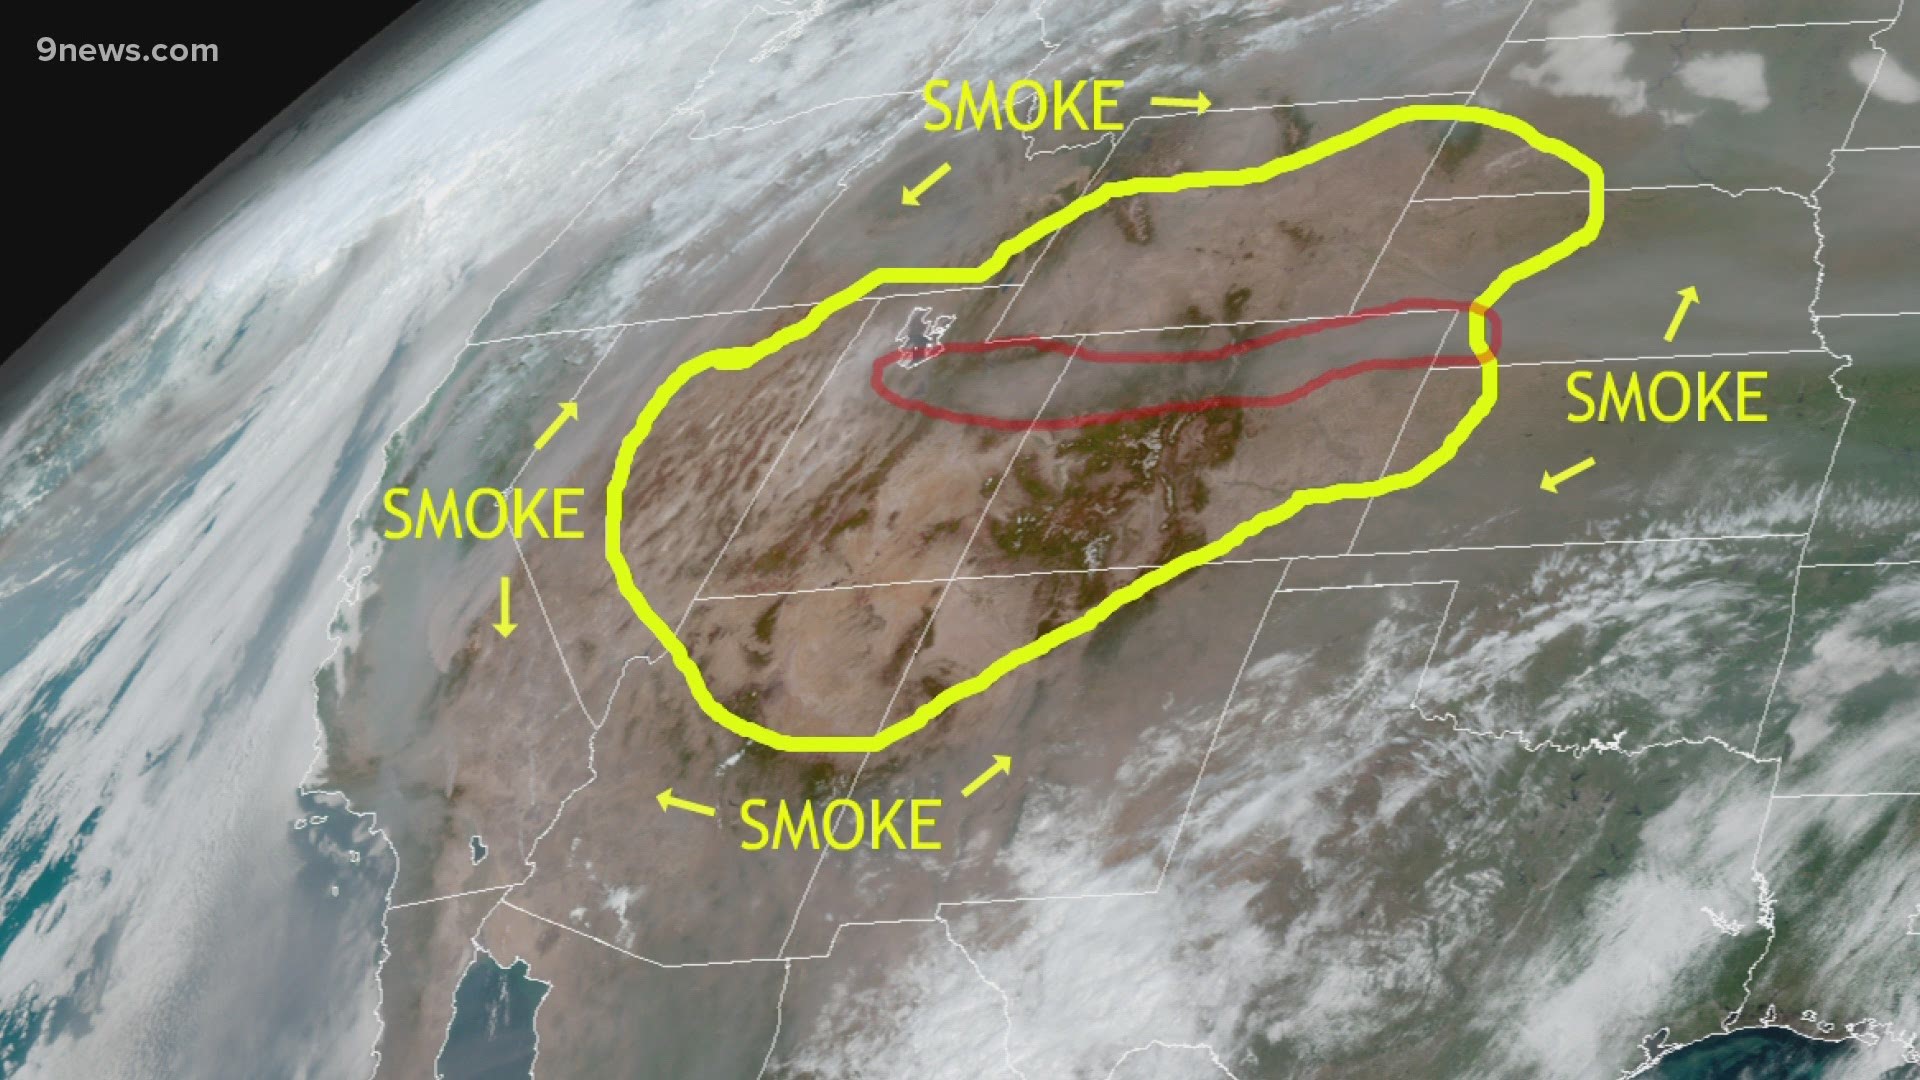 Our Cory Reppenhagen tells us about those features and when the smoke will return to our skies.